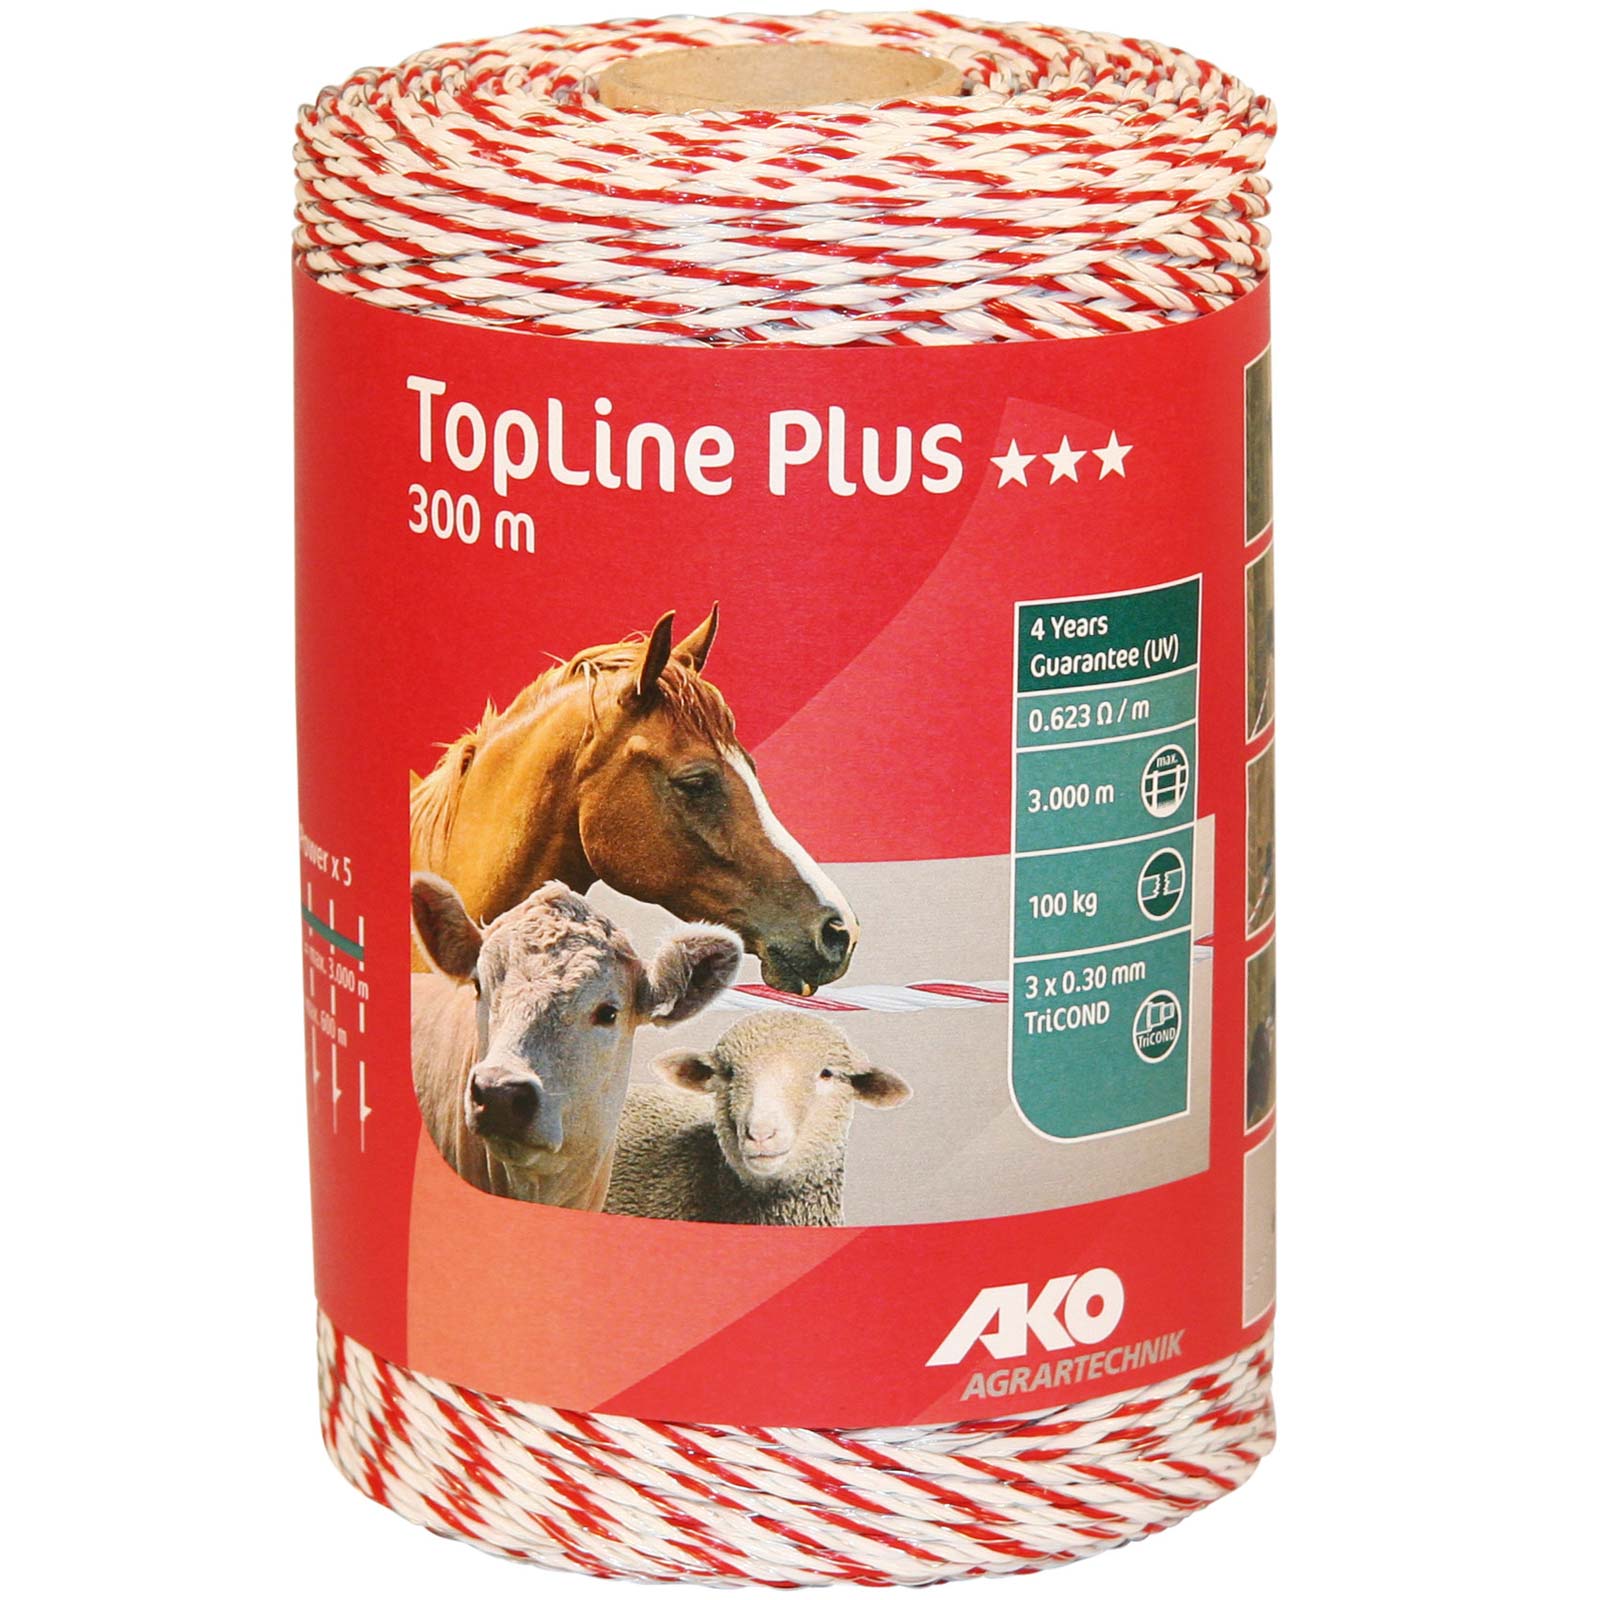 Ako Pasture Fence Polywire TopLine Plus 0.30 TriCOND, white-red